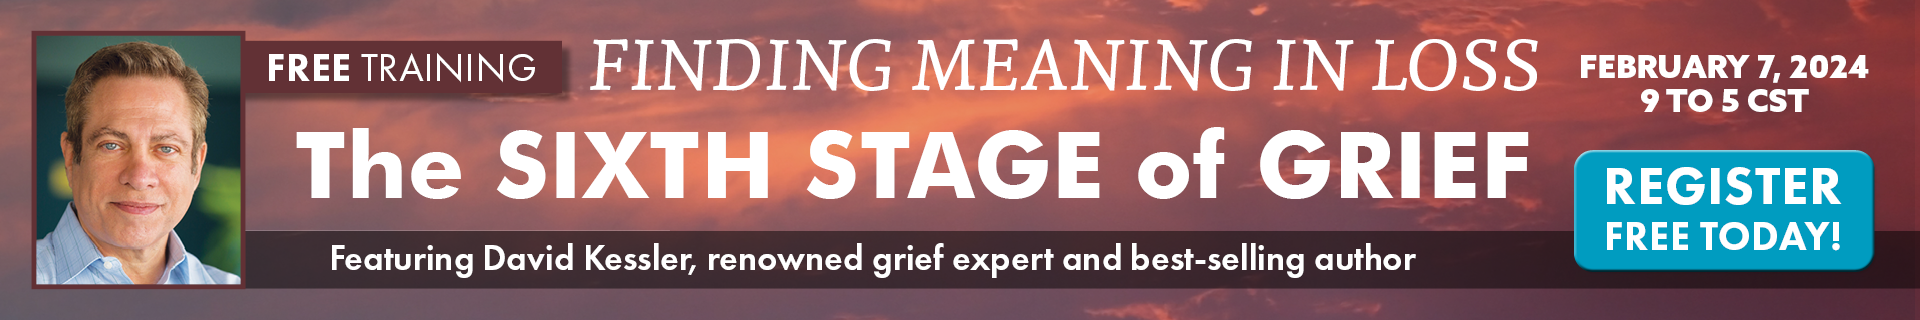 Finding Meaning in Loss: The Sixth Stage of Grief